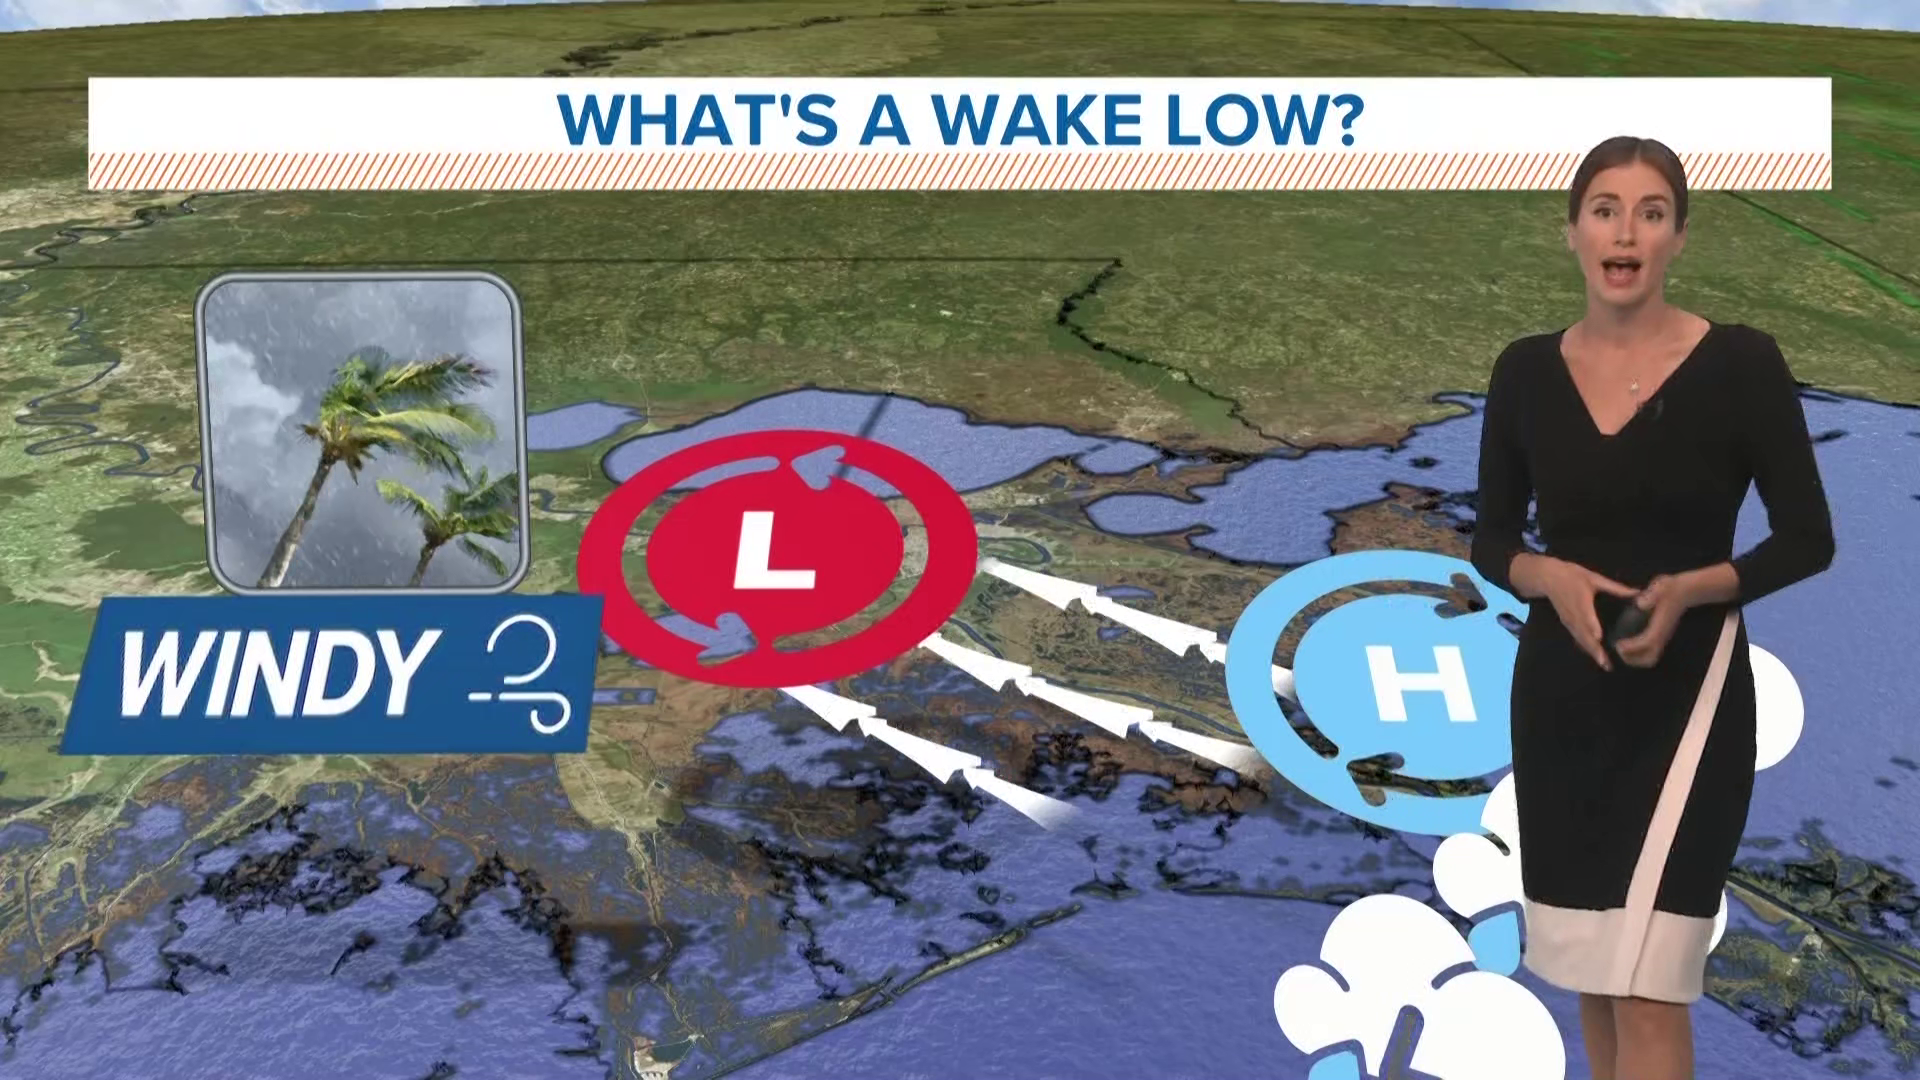 So what is a "wake low"? It’s a small area of low pressure that sometimes develops behind a line of thunderstorms.